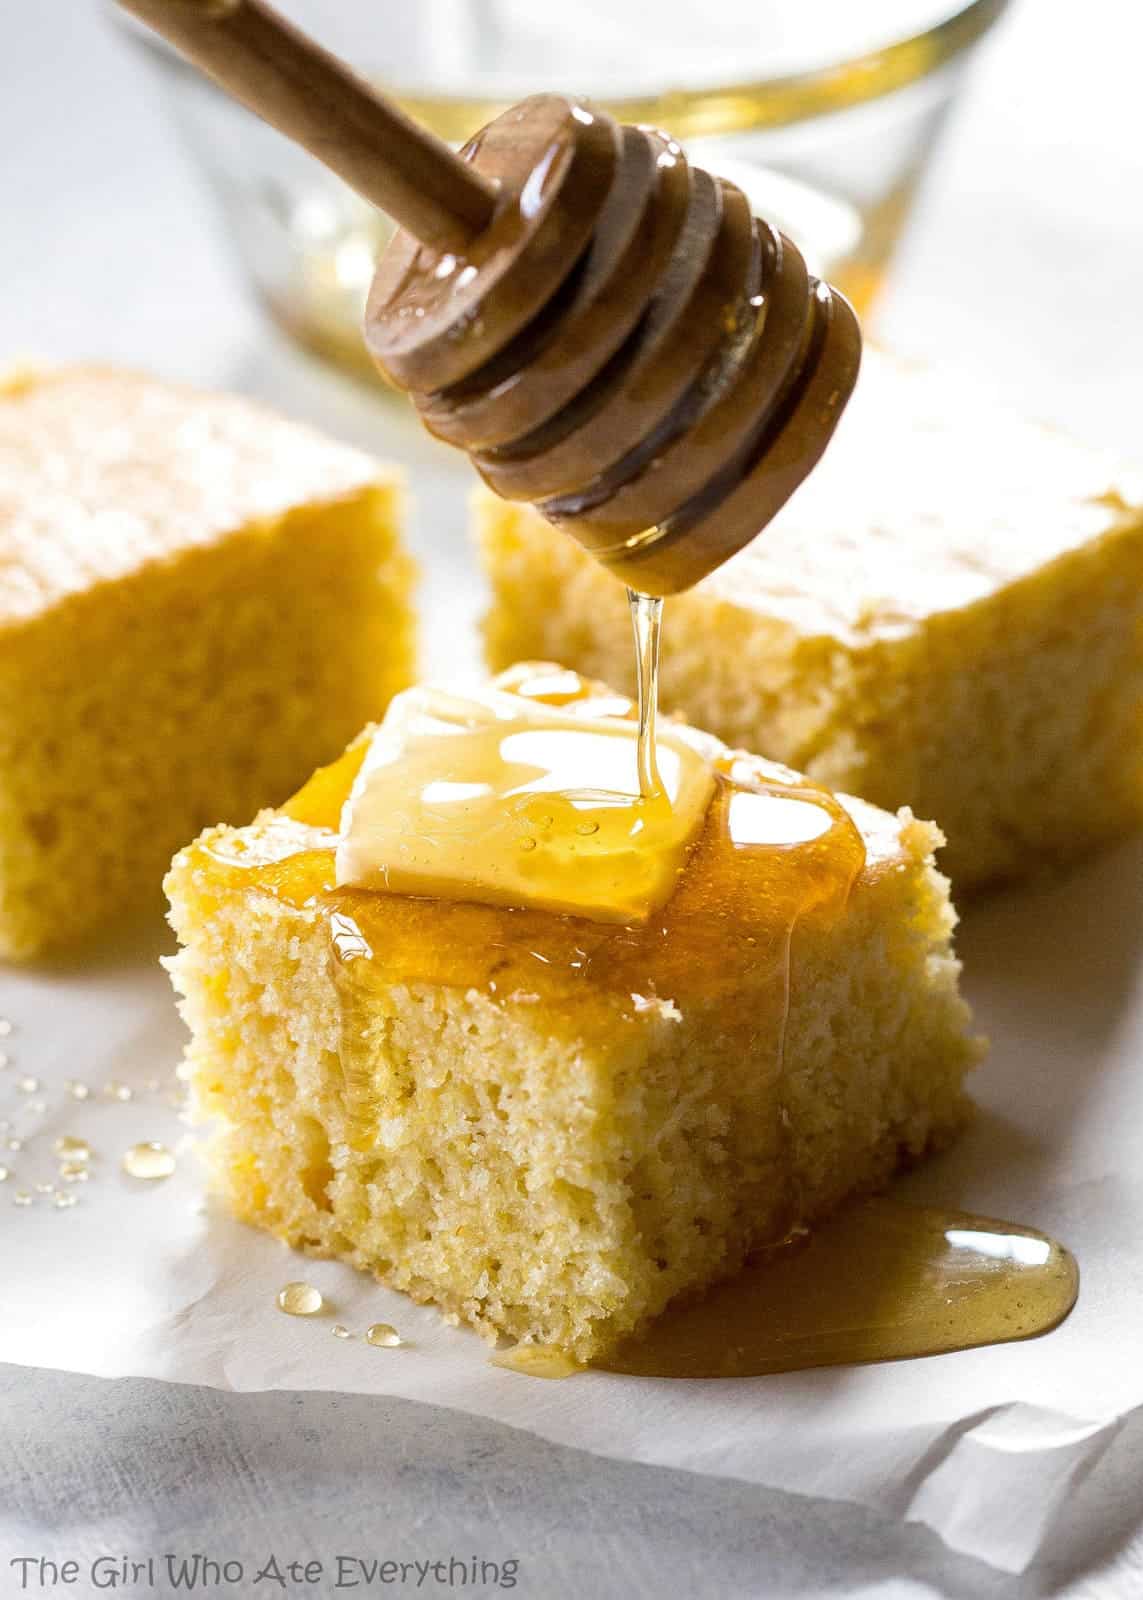 The Best Sweet Cornbread Recipe (+VIDEO) - The Girl Who Ate Everything